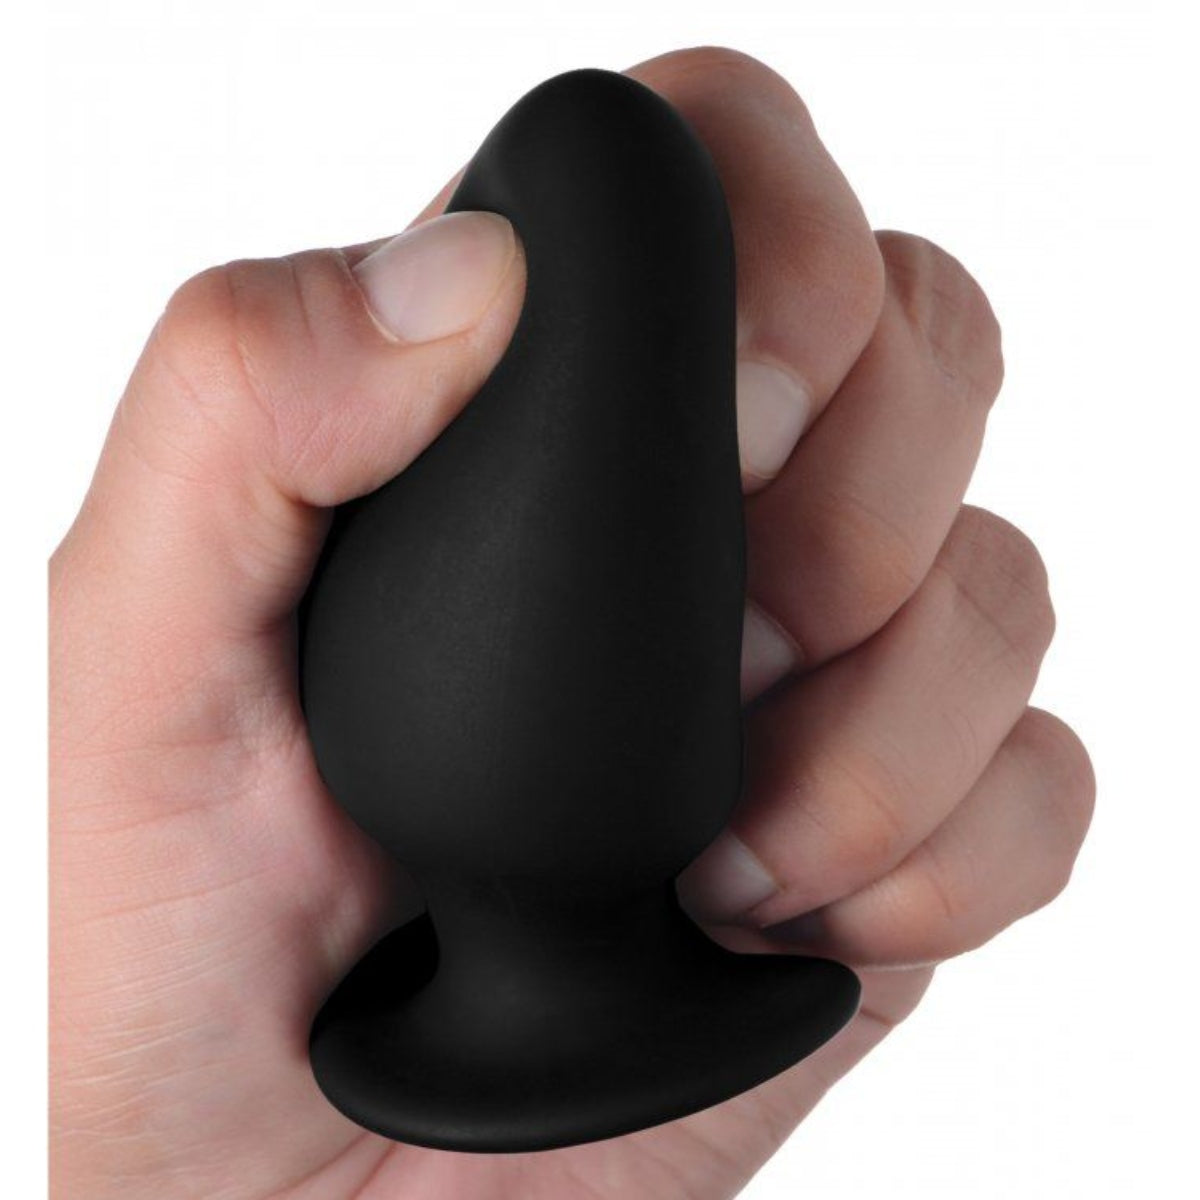 Squeeze-It Squeezable Silicone Butt Plug Black Small